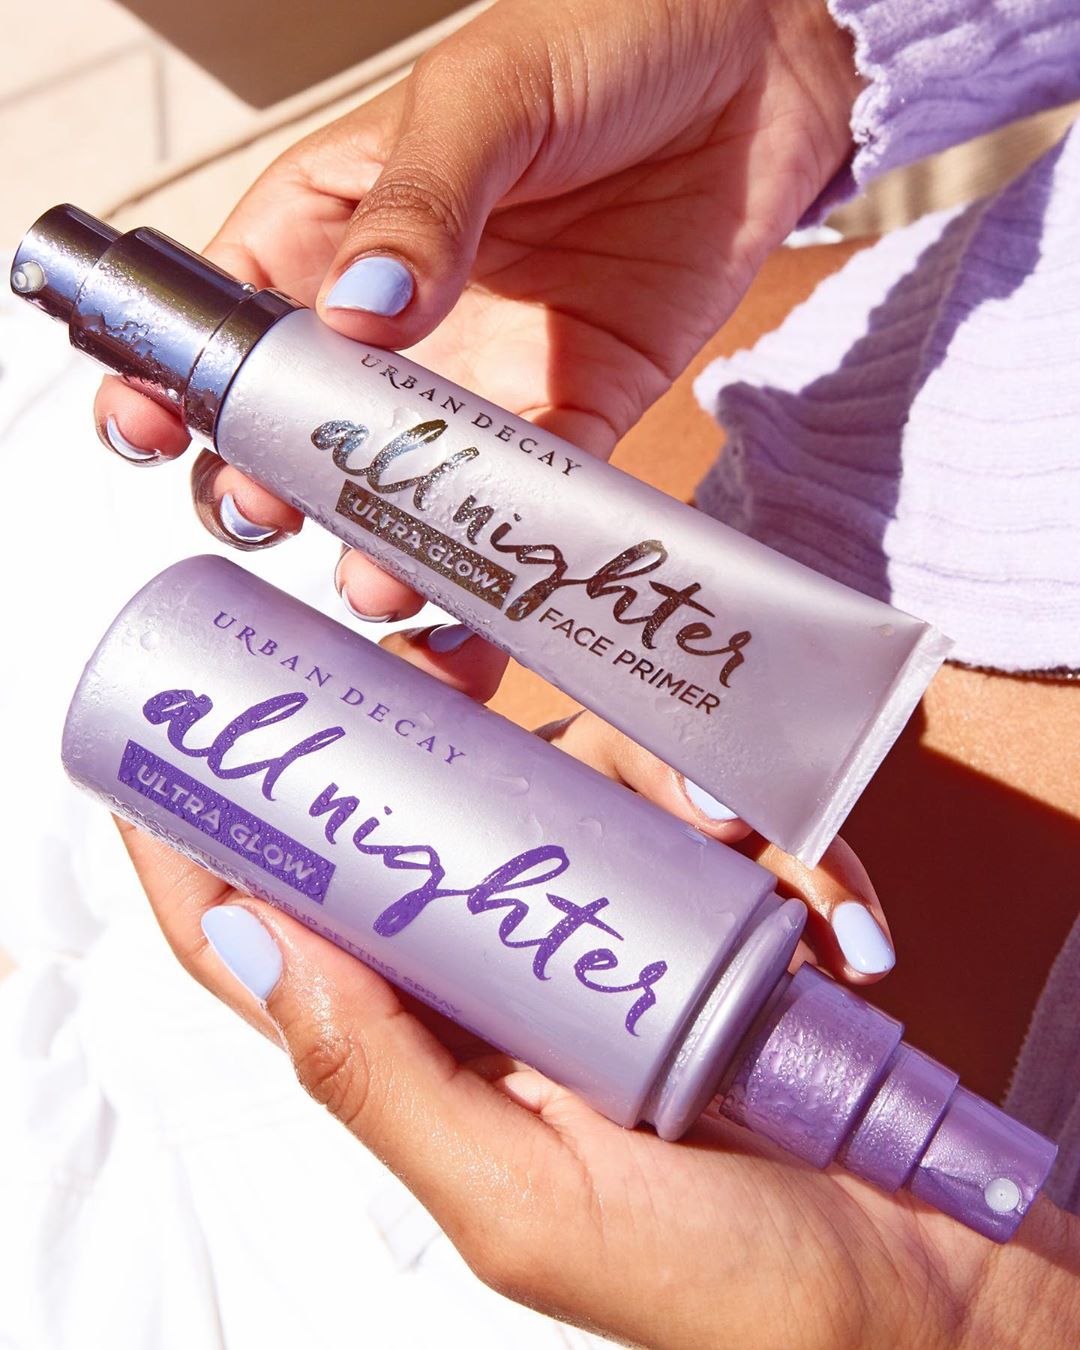 Urban Decay Cosmetics - Which all-new Ultra Glow product can you not live without lately—All Nighter Ultra Glow Face Primer or All Nighter Ultra Glow Setting Spray? #UrbanDecay #UDAllNighter #GlowingS...